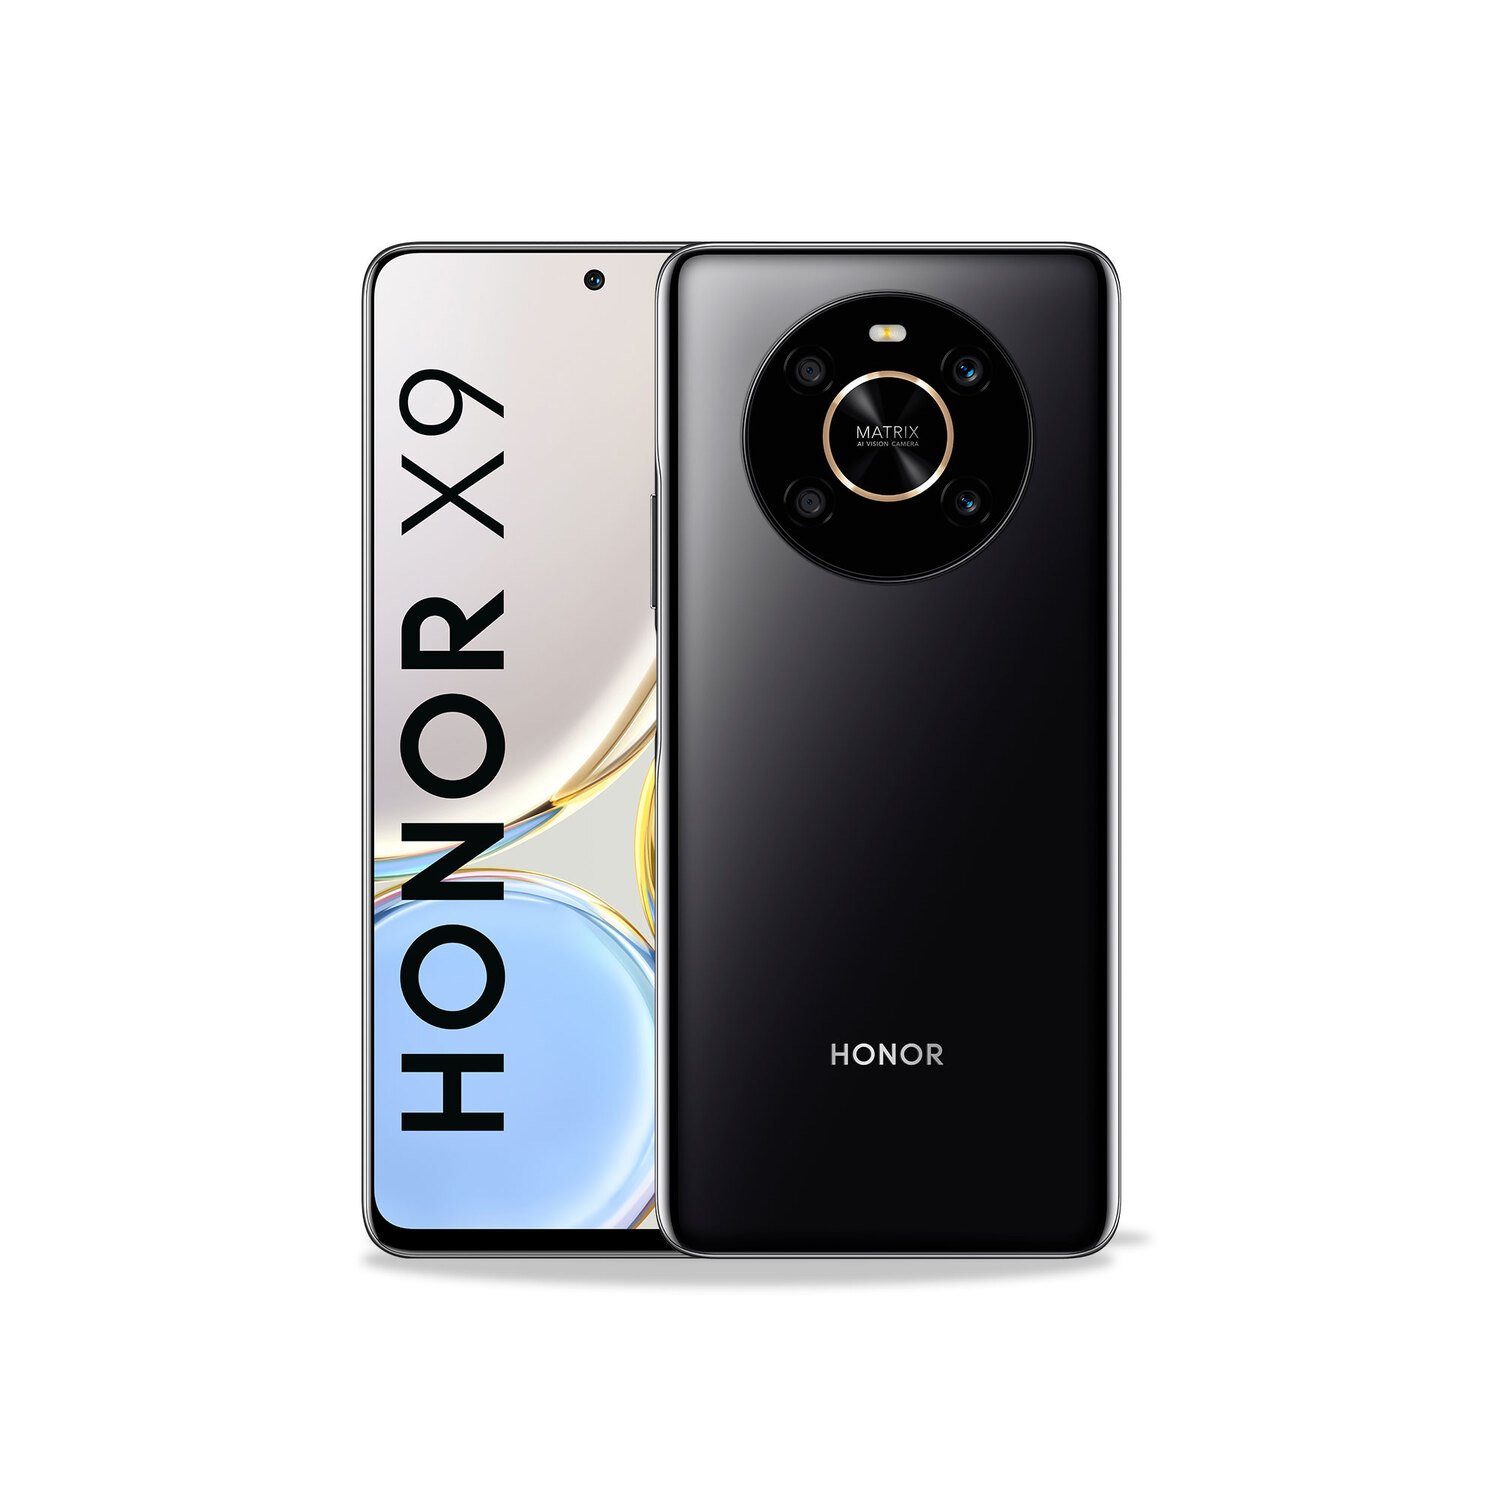 HONOR 4G ANY-LX3 X9 128GB, color negro